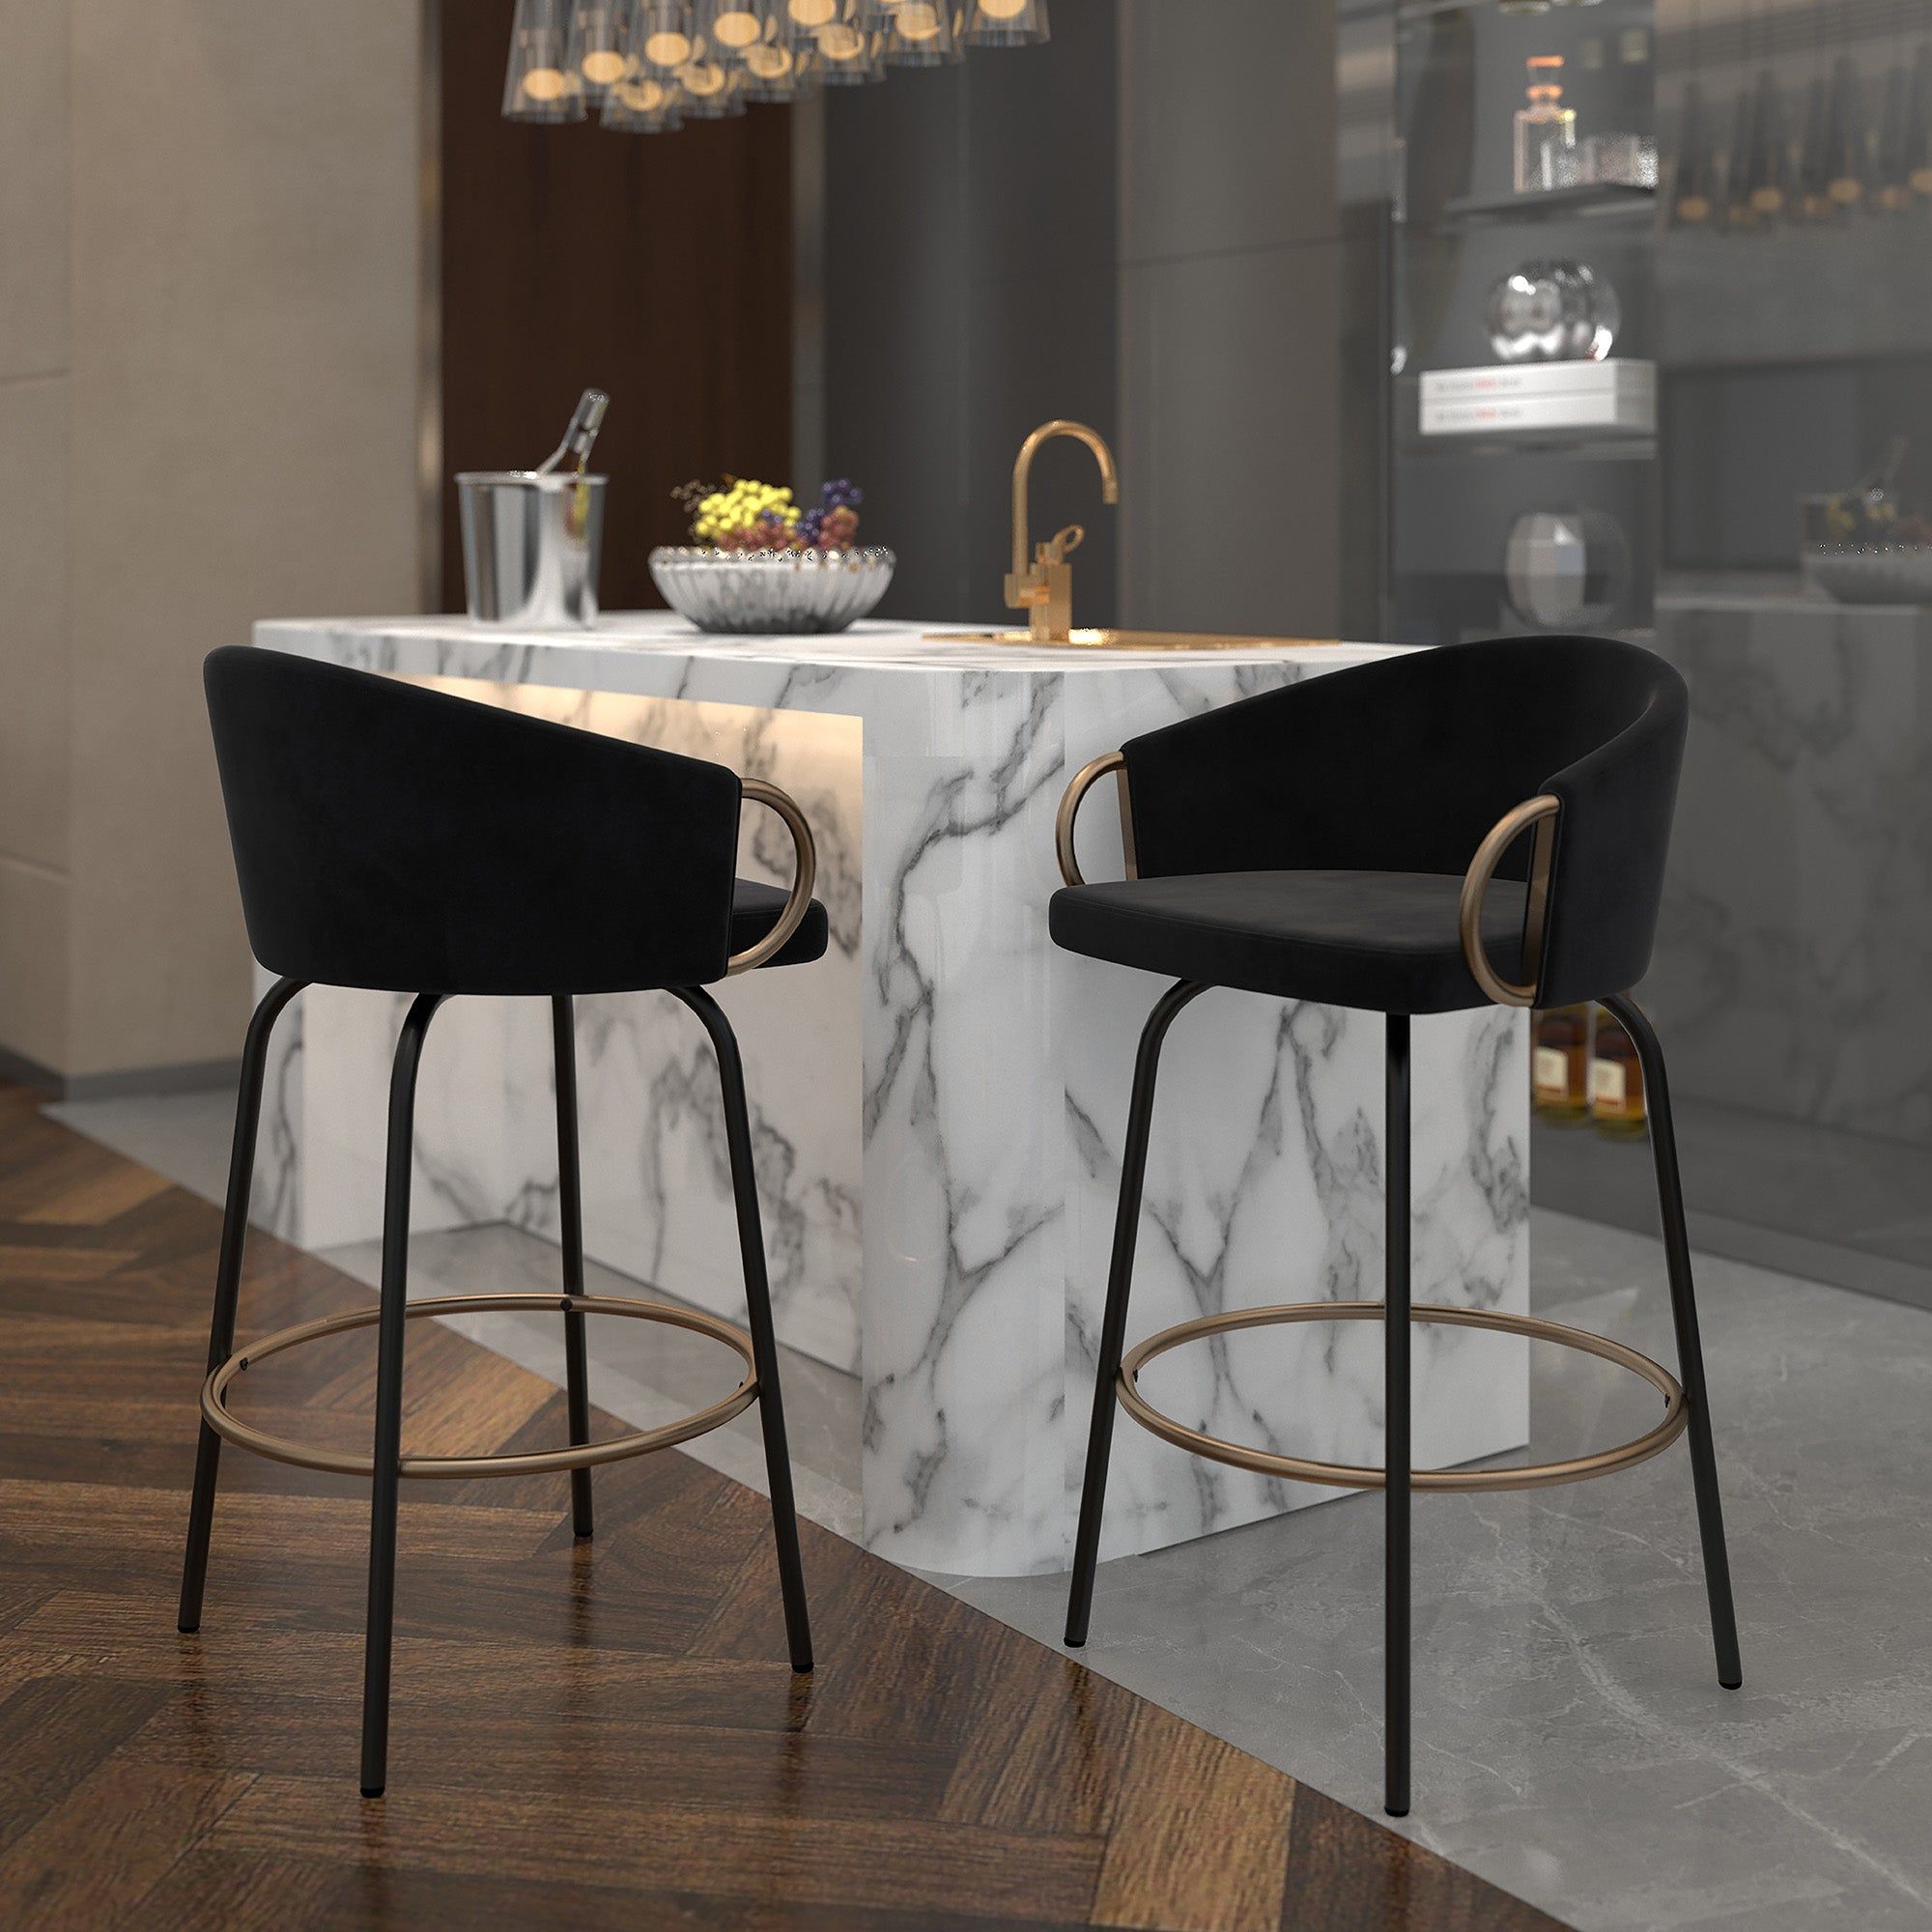 Upgrade Your Seating with Stylish and Functional Bar Stools: Find the Perfect Balance of Comfort and Function with Swivel Bar Stools Featuring Arms and Backs